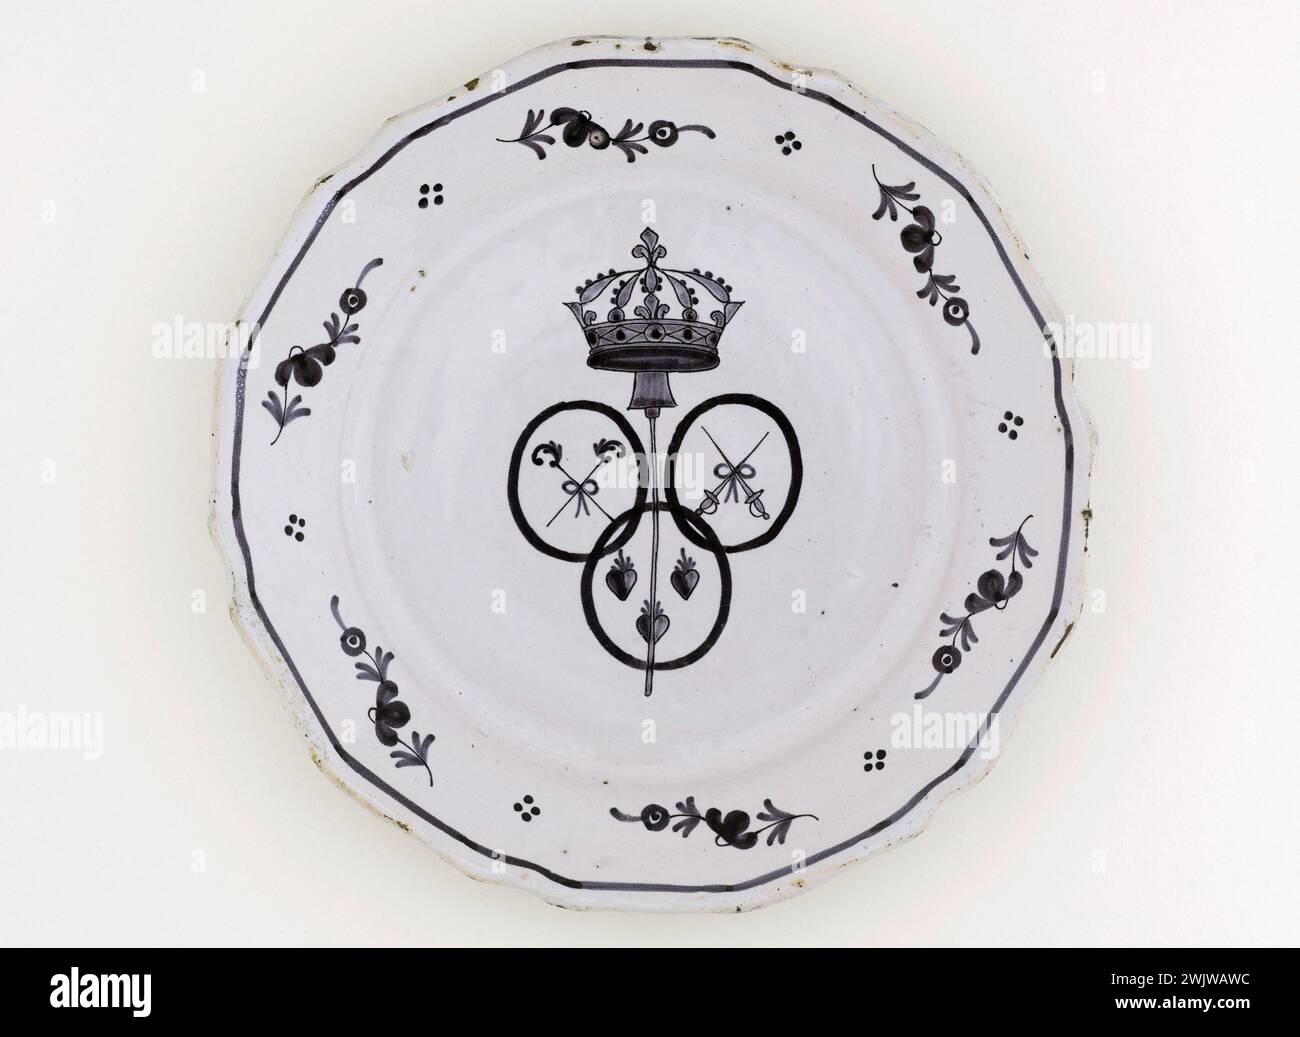 Anonymous. Plate. Earthenware. Around 1789. Paris, Carnavalet museum. 70955-23 Weapon, Heart, Crown, Epee, Faience, Decorative Pattern, Revolutionary Periode, Crockery, Plate Stock Photo